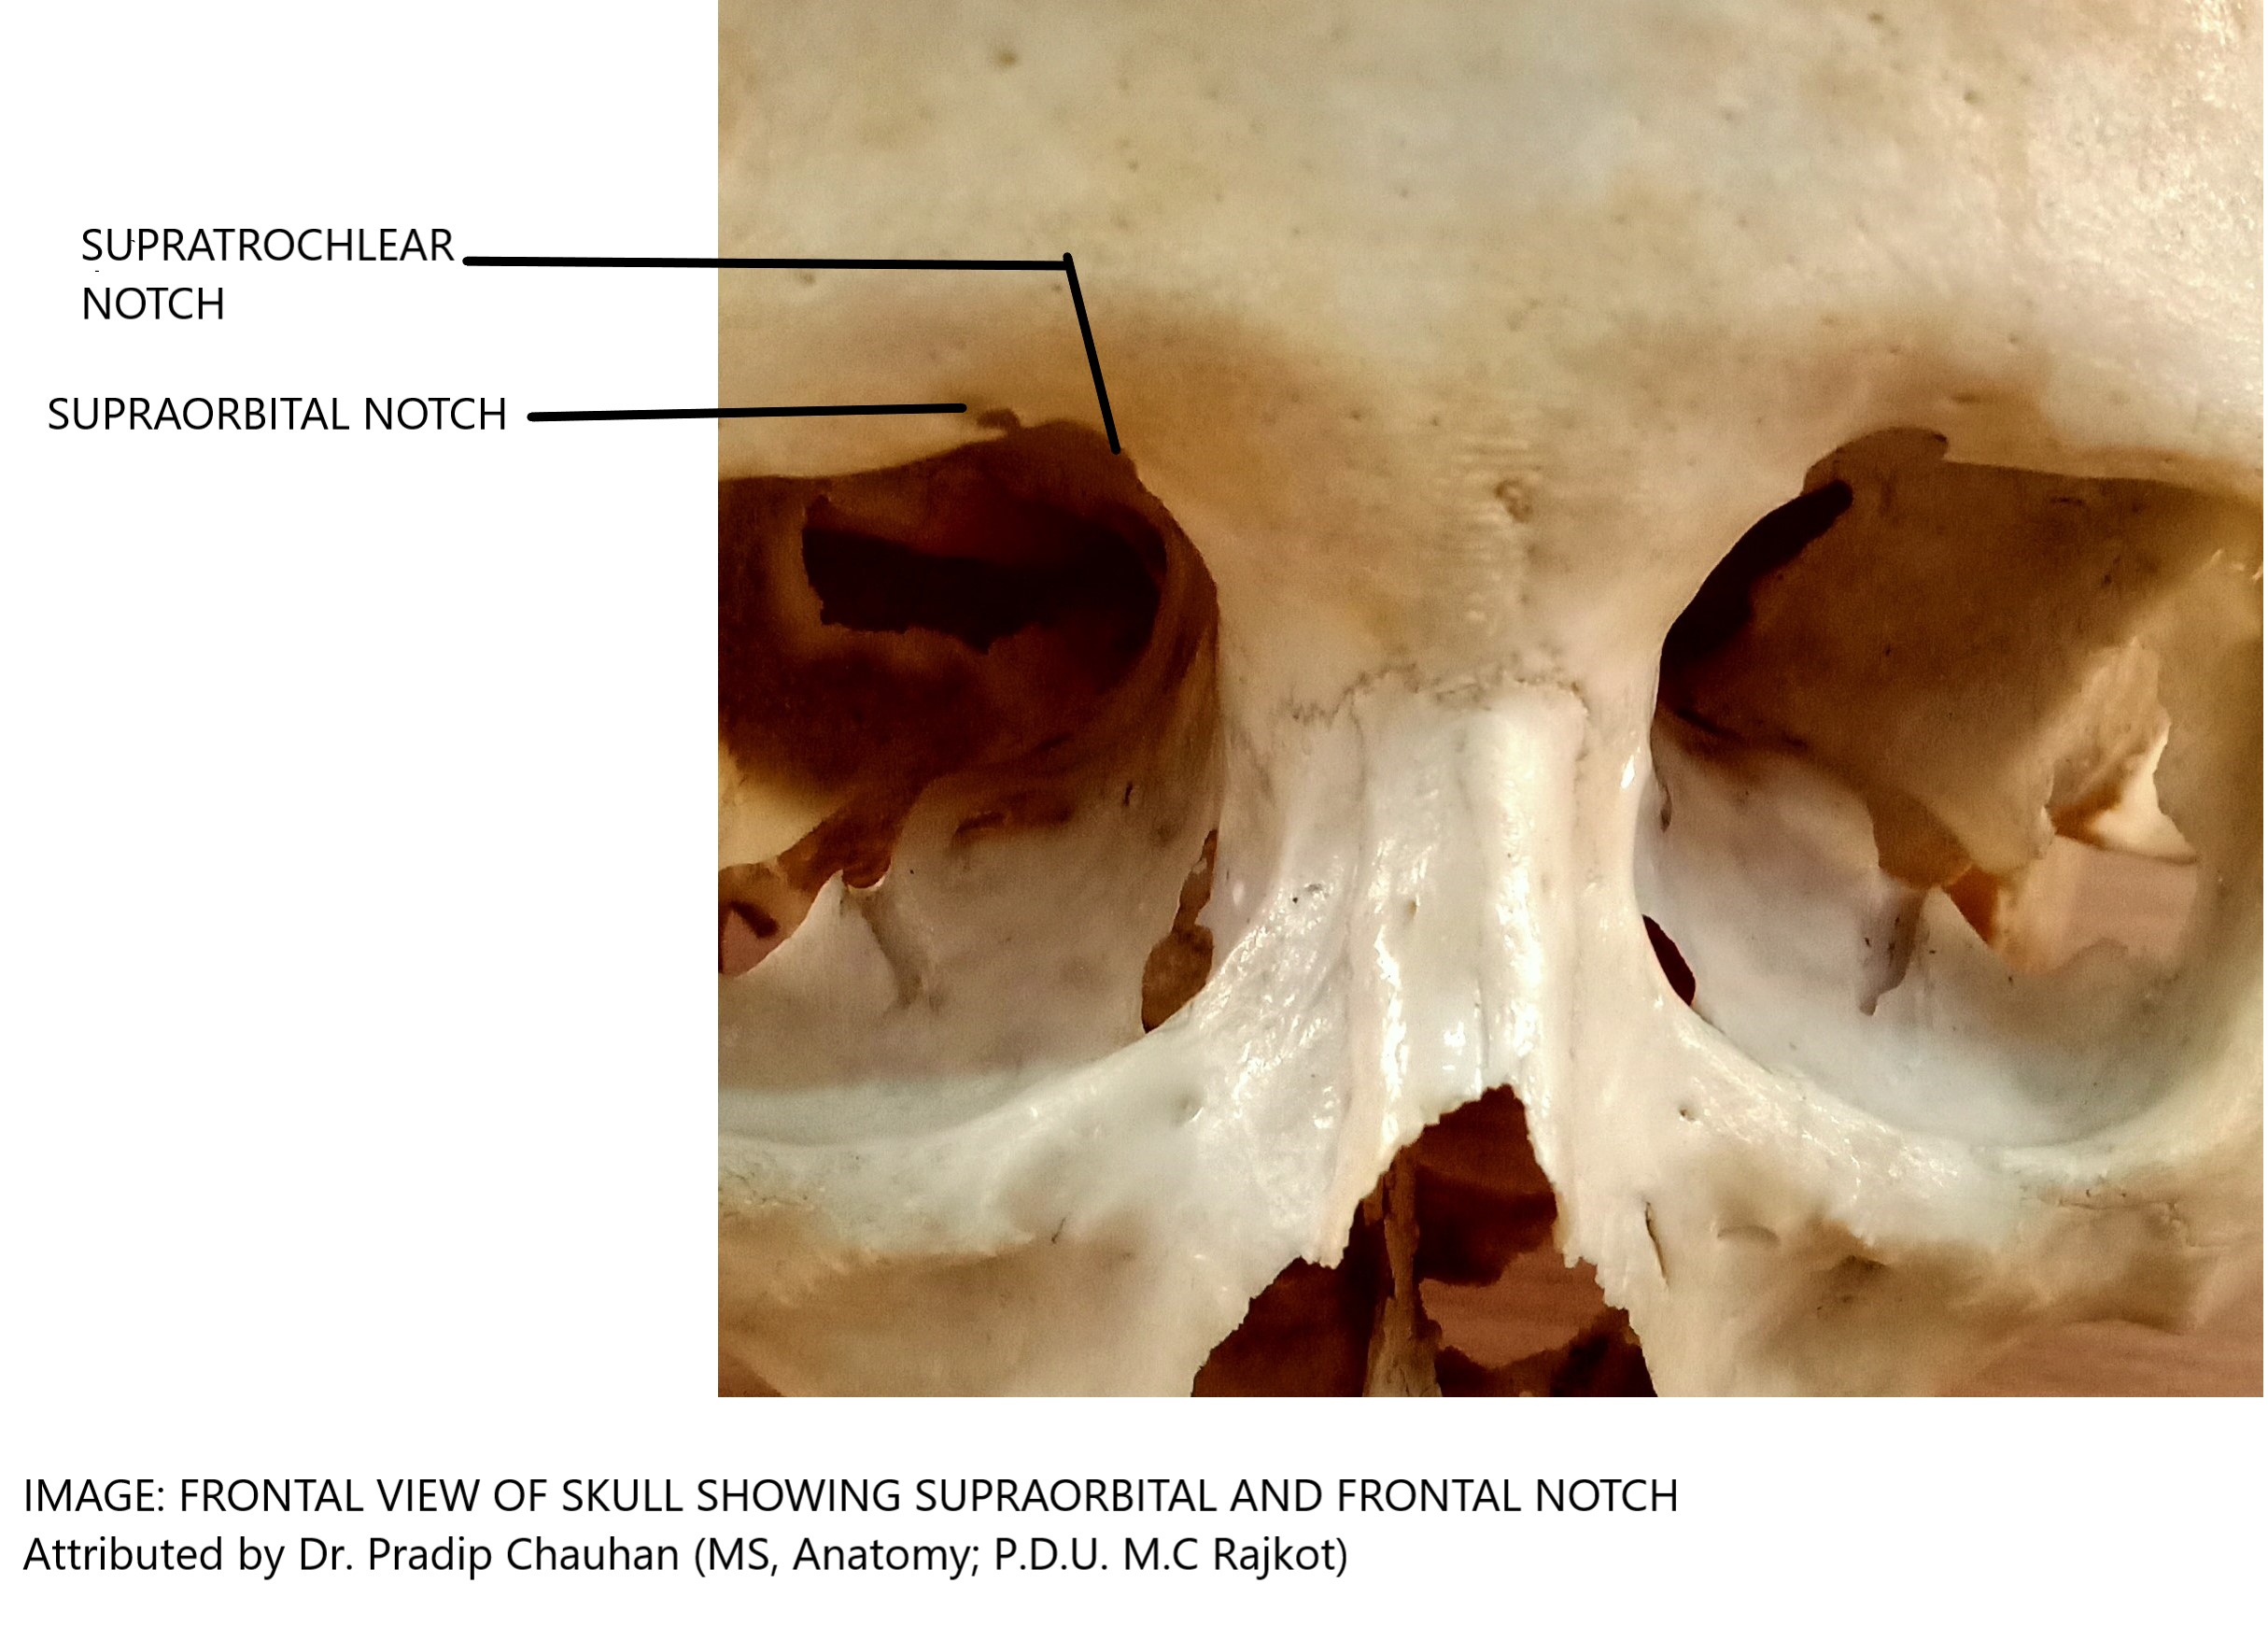 FRONTAL VIEW OF THE SKULL SHOWING SUPRATROCHLEAR AND SUPRAORBITAL NOTCH